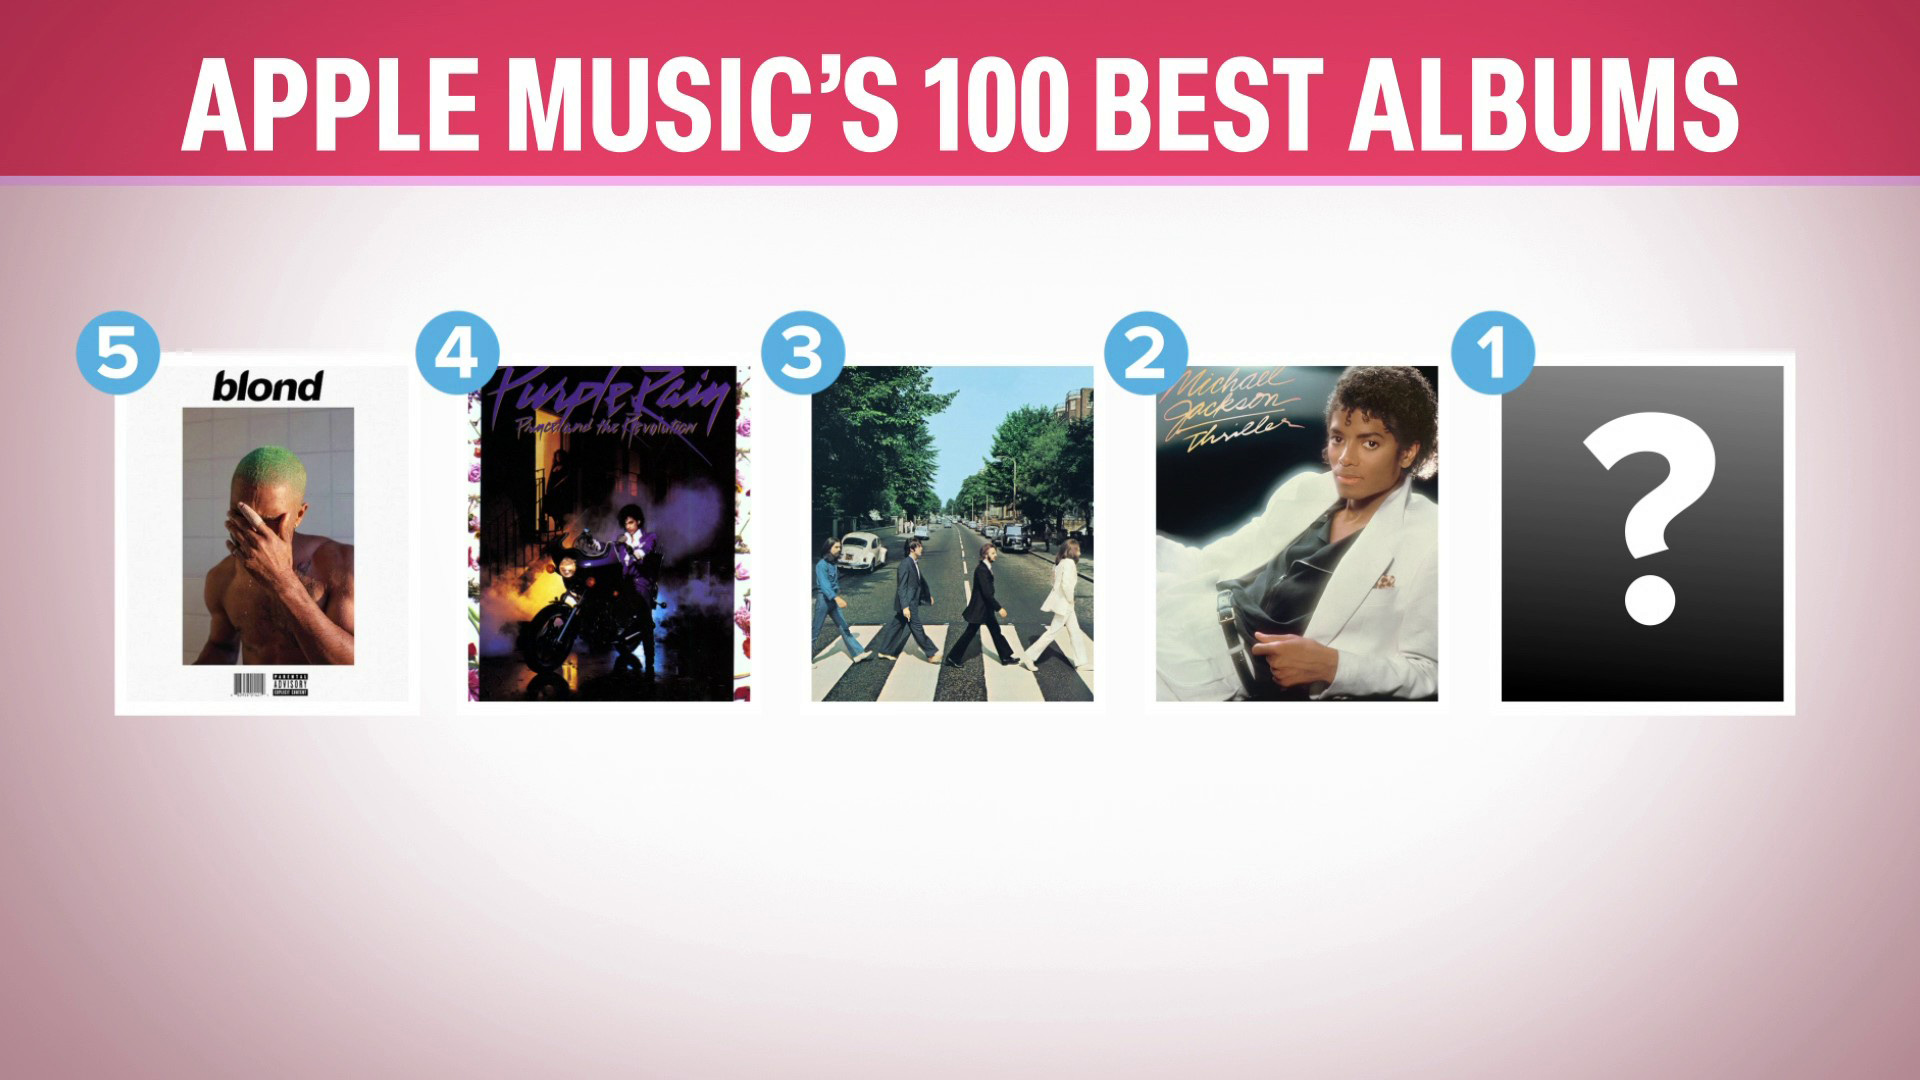 See who tops Apple Music's list of best albums of all time